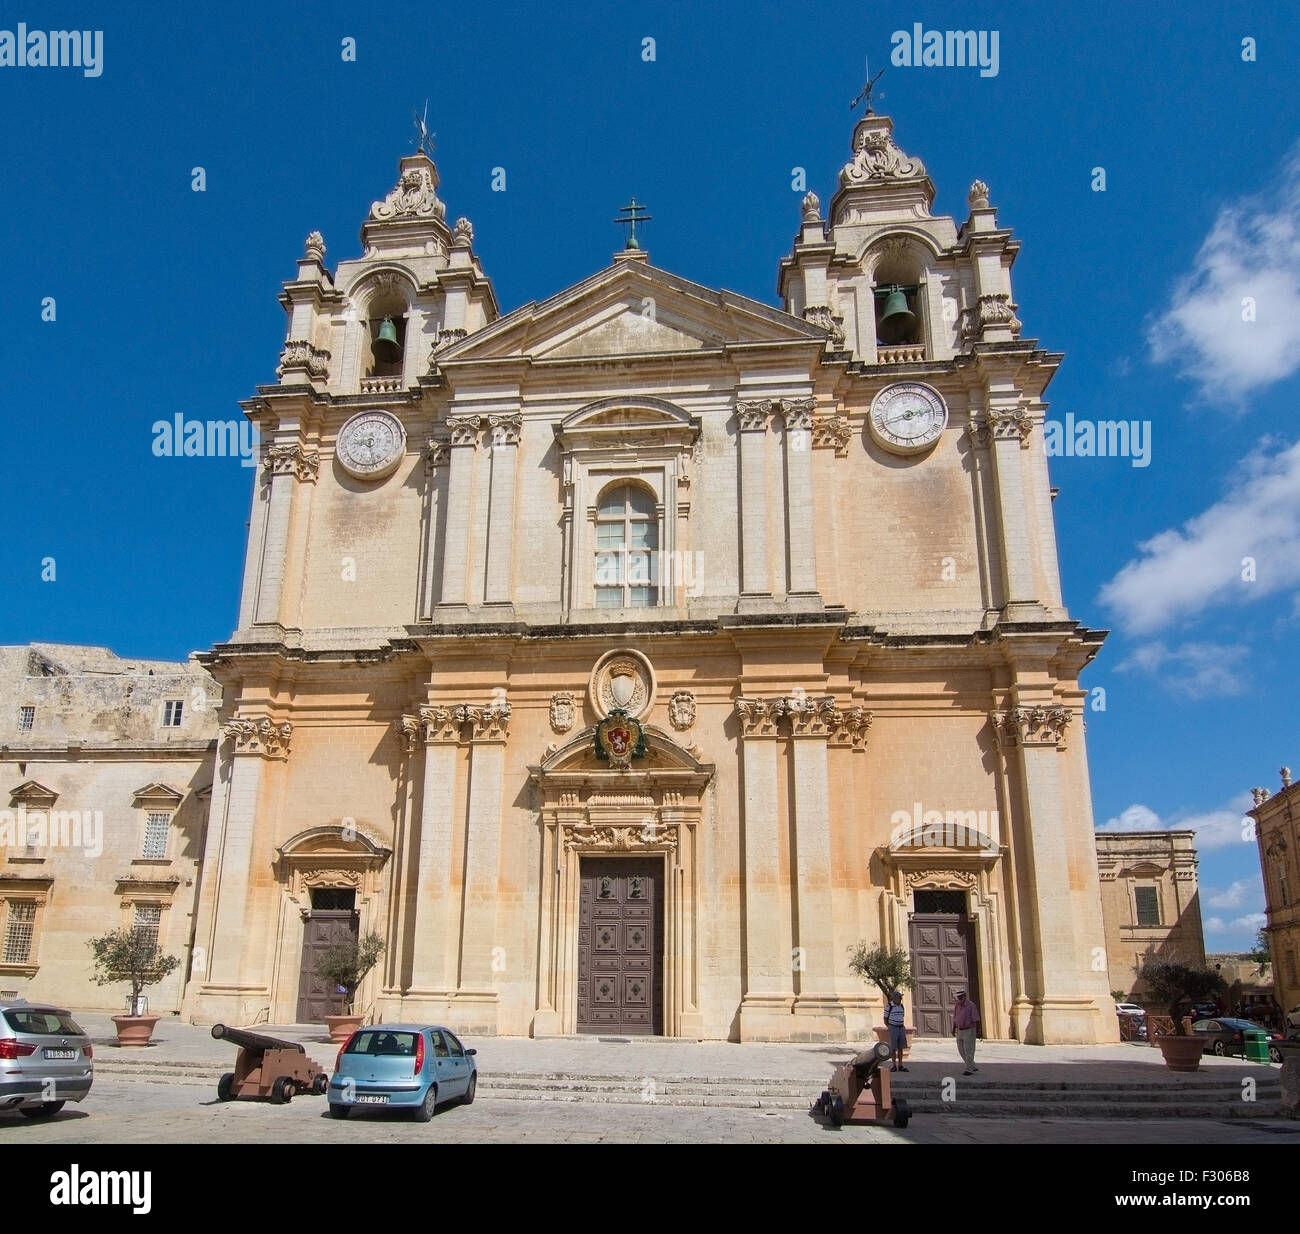 Baroque church building with iron cannons inside old city walls on a sunny day in September in Mdina, Malta. Stock Photo